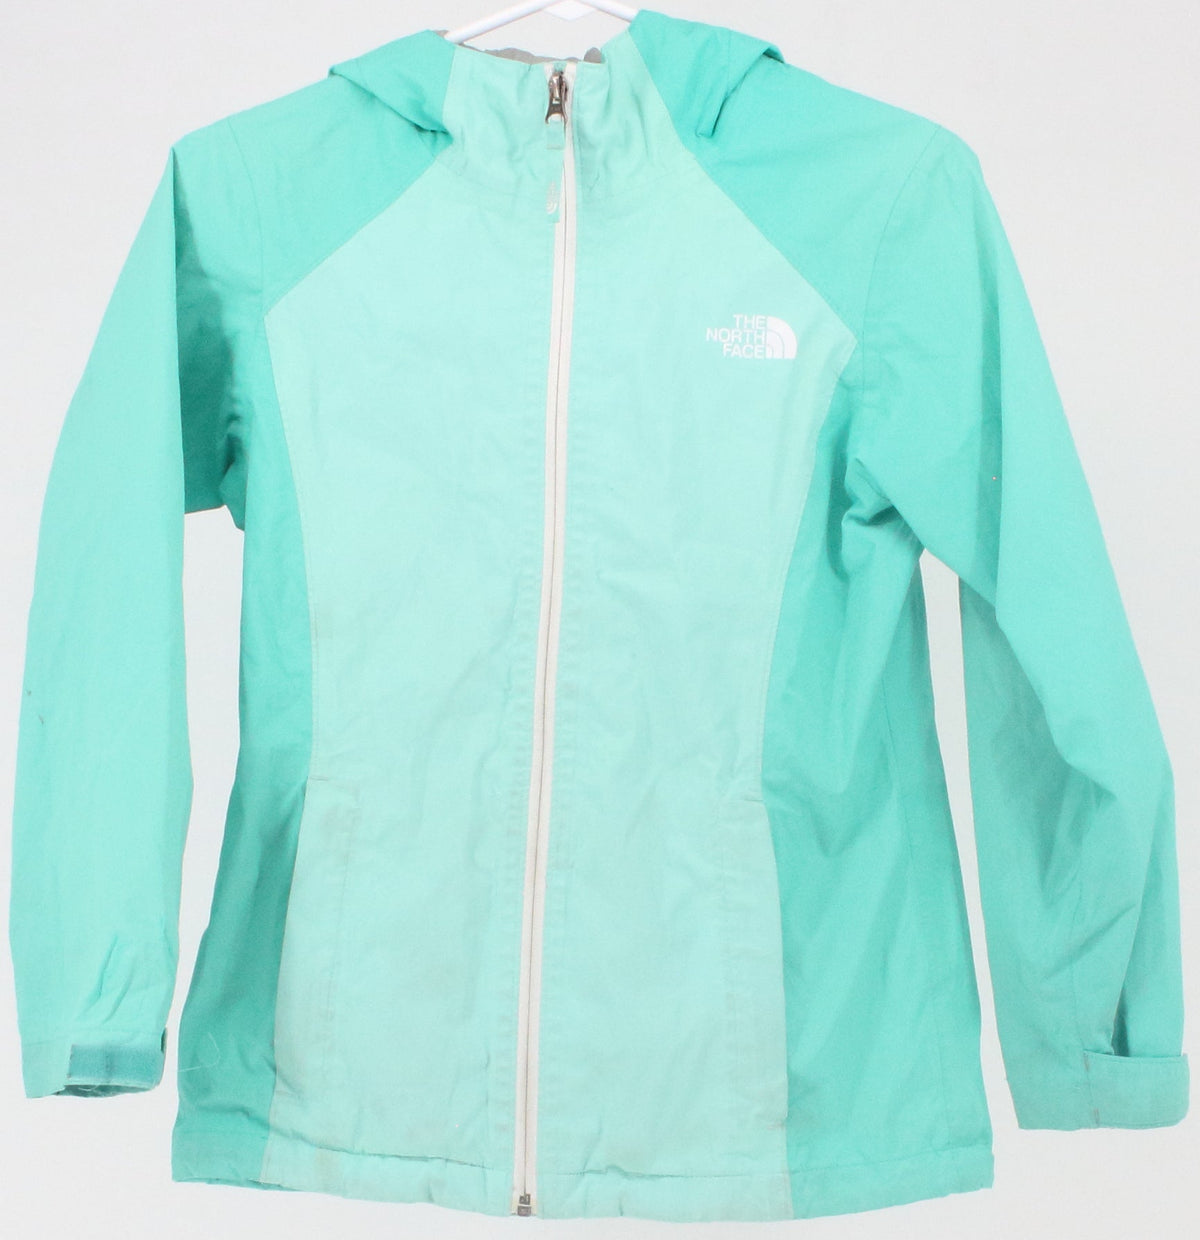 The North Face Aqua Green Hooded Children's Jacket